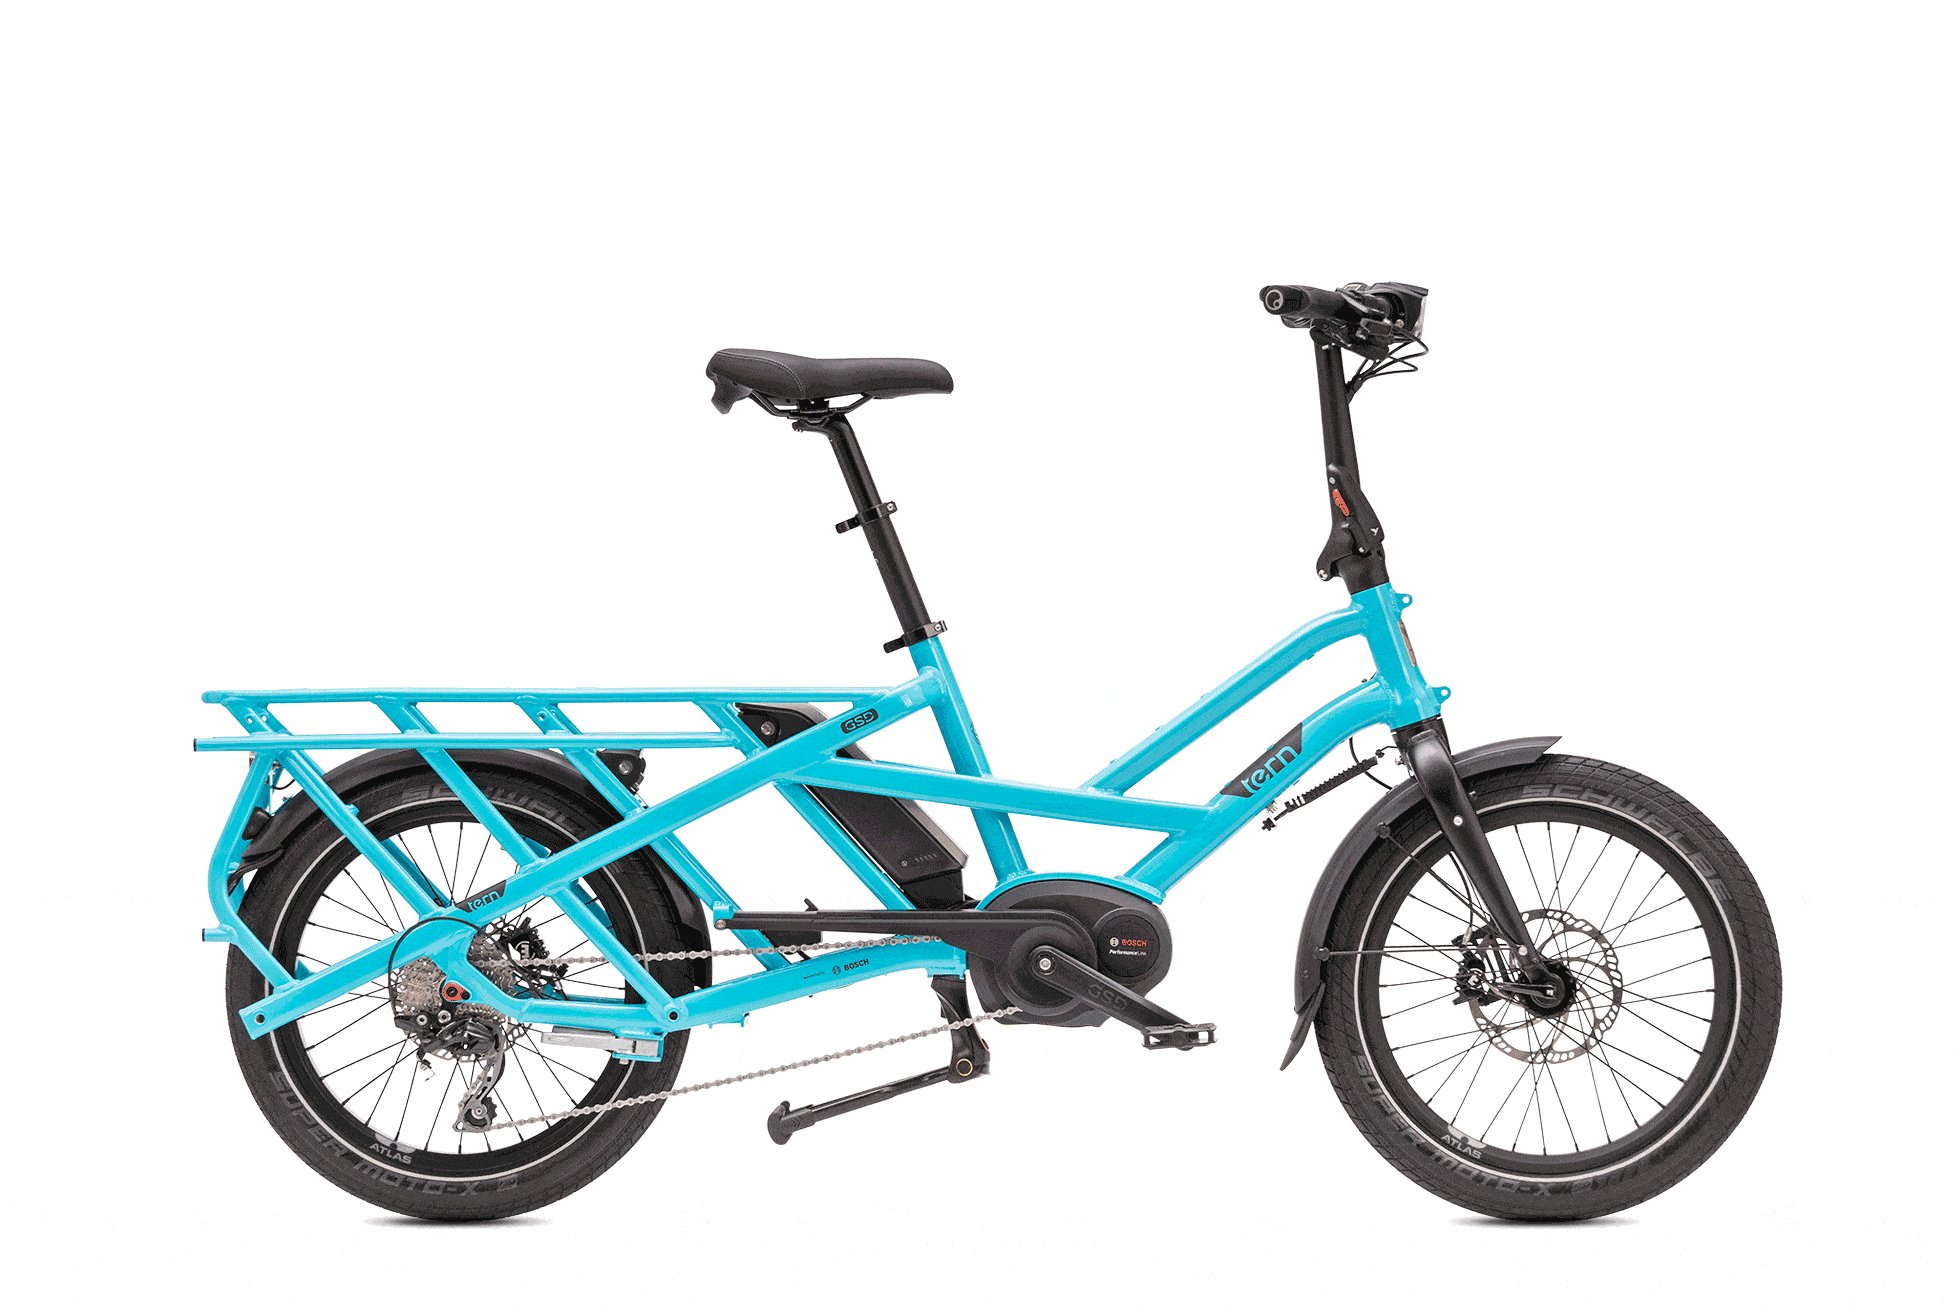 The Tern Gsd A Compact Utility Ebike For Families Tern